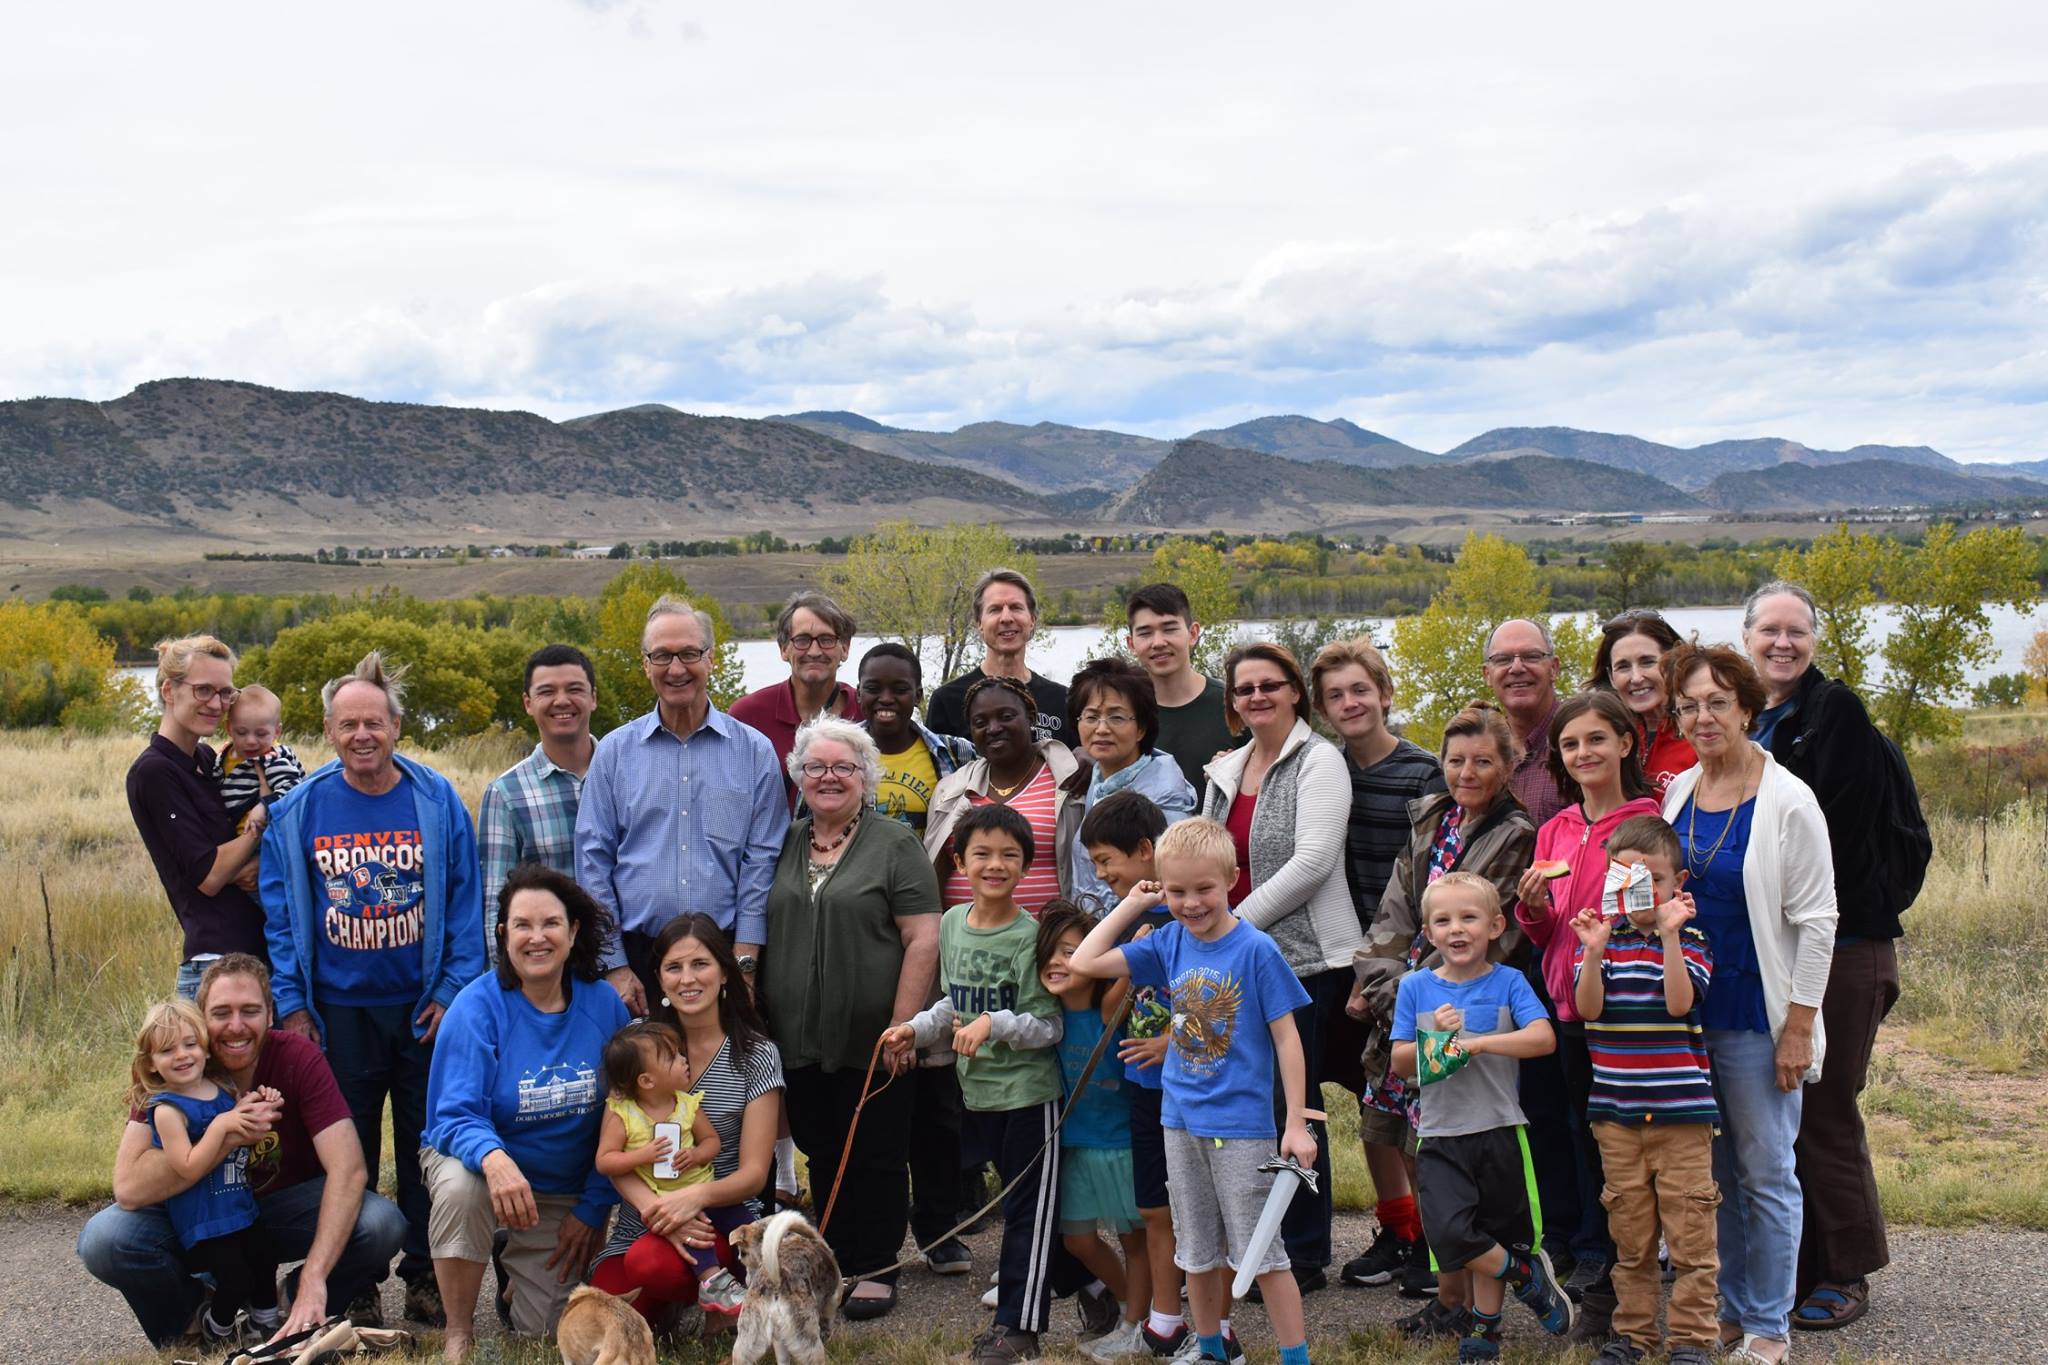 Group photo after the picnic at Chatfield State Park